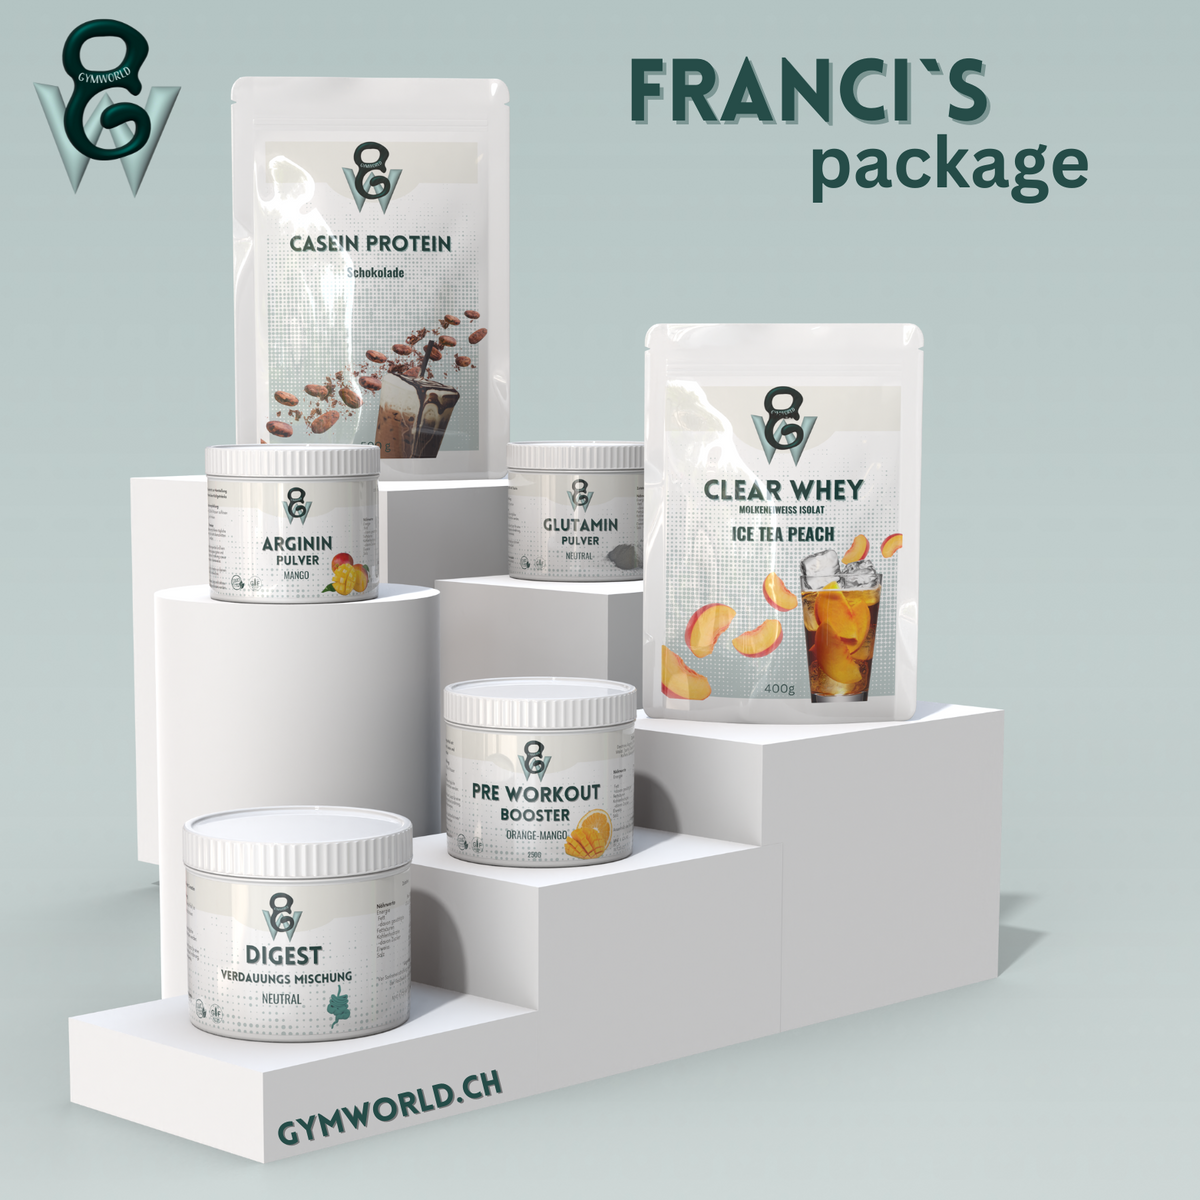 FRANCI'S PACKAGE